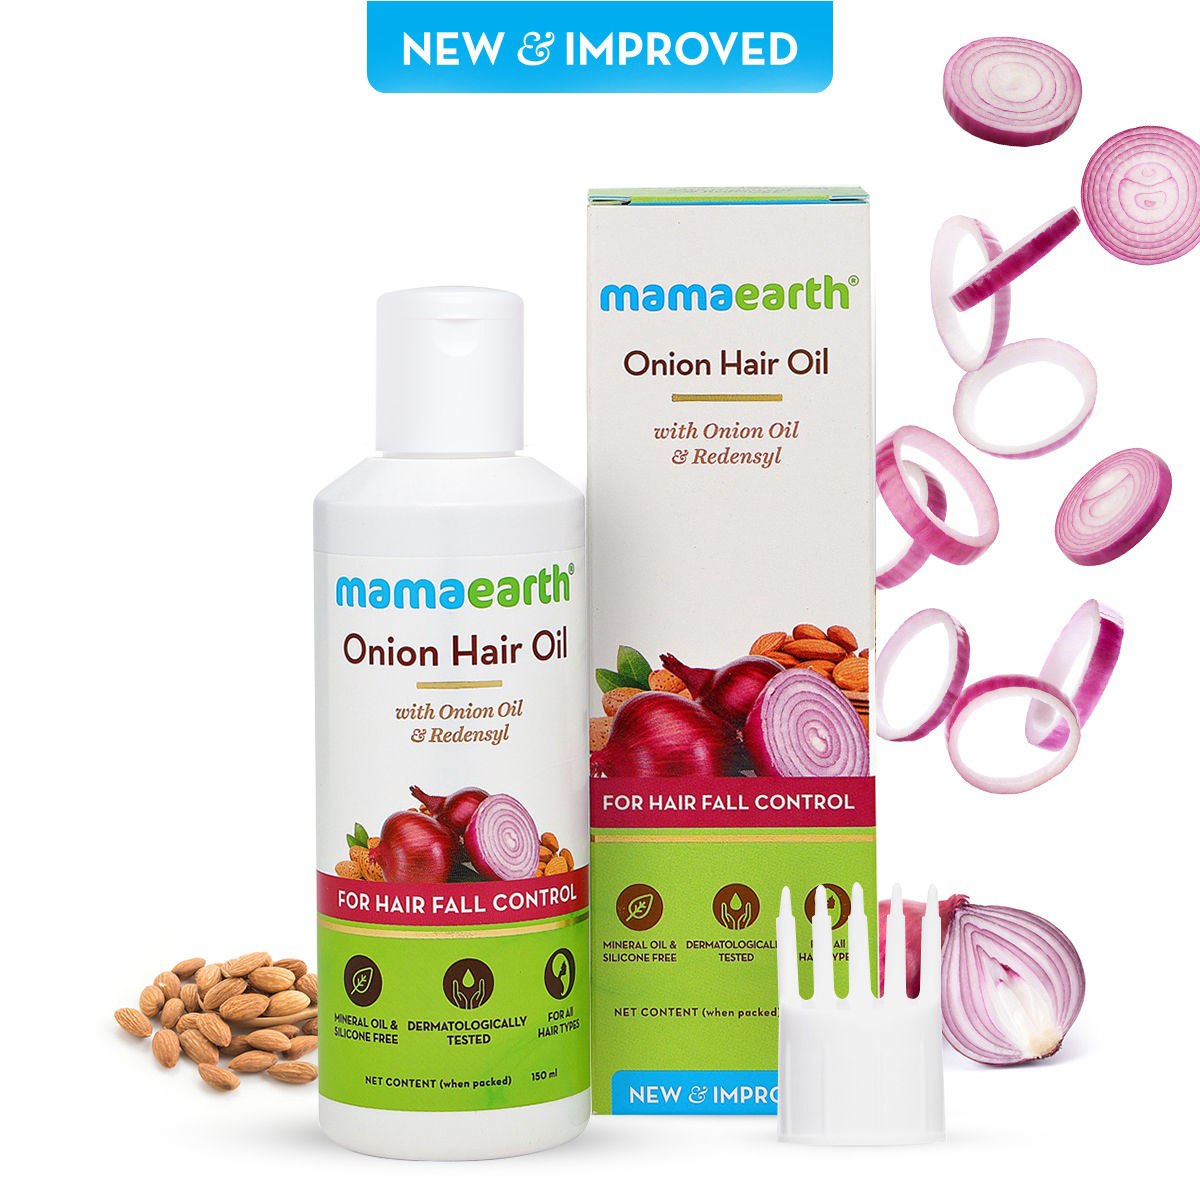 Mamaearth Onion Oil For Hair Regrowth & Hair Fall Control With Redensyl